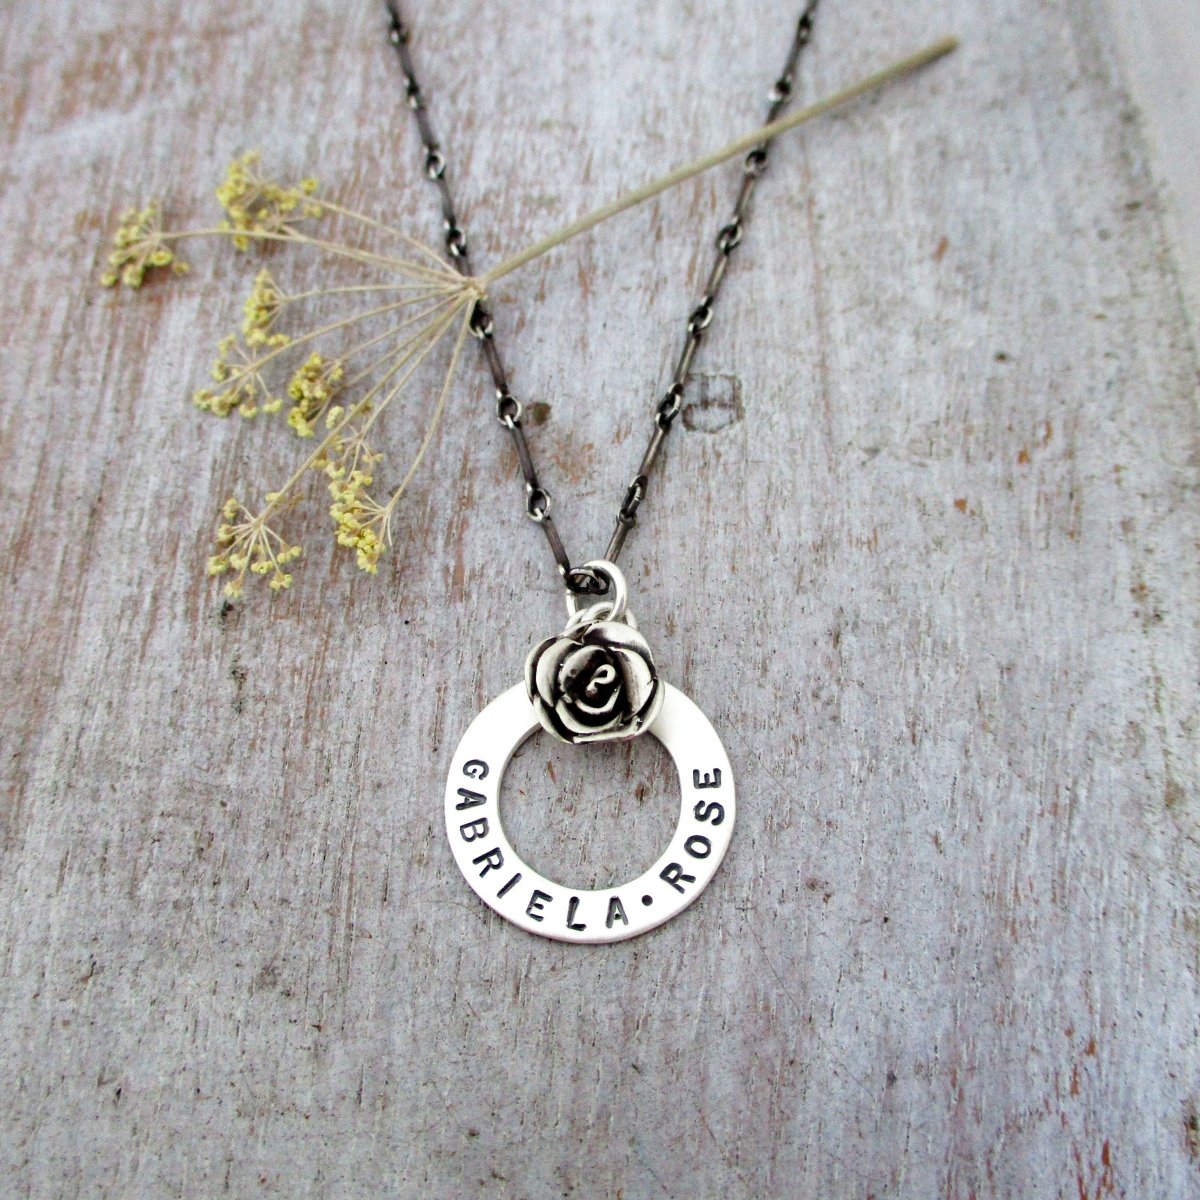 Vintage Rose and Name Necklace in Silver - Luxe Design Jewellery